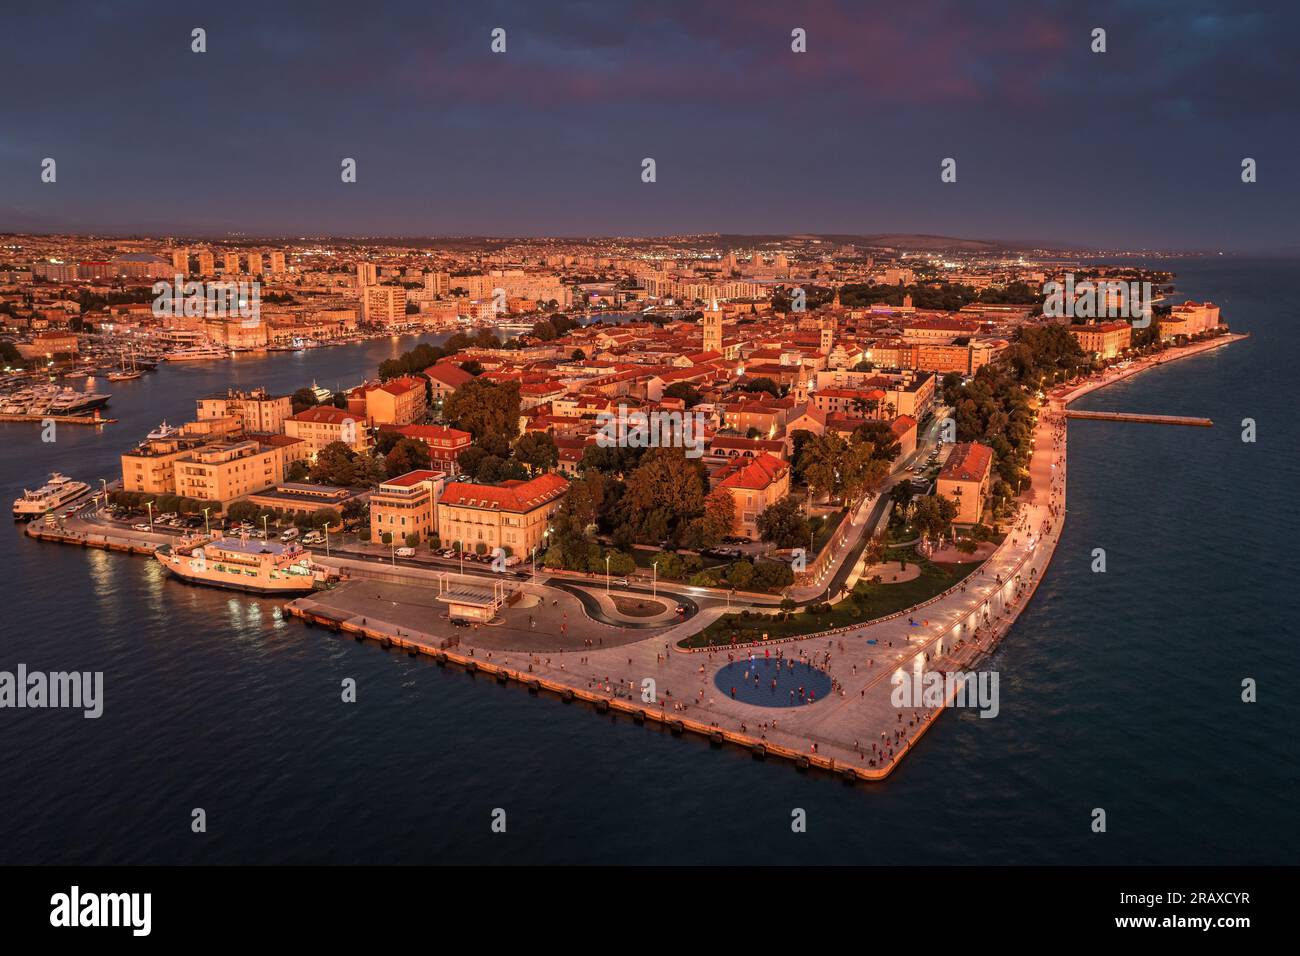 Zadar, Croatia - Aerial panoramic view of golden glowing old town of Zadar with the greeting to the sun monument, sea organ, dramatic sunset lights on Stock Photo